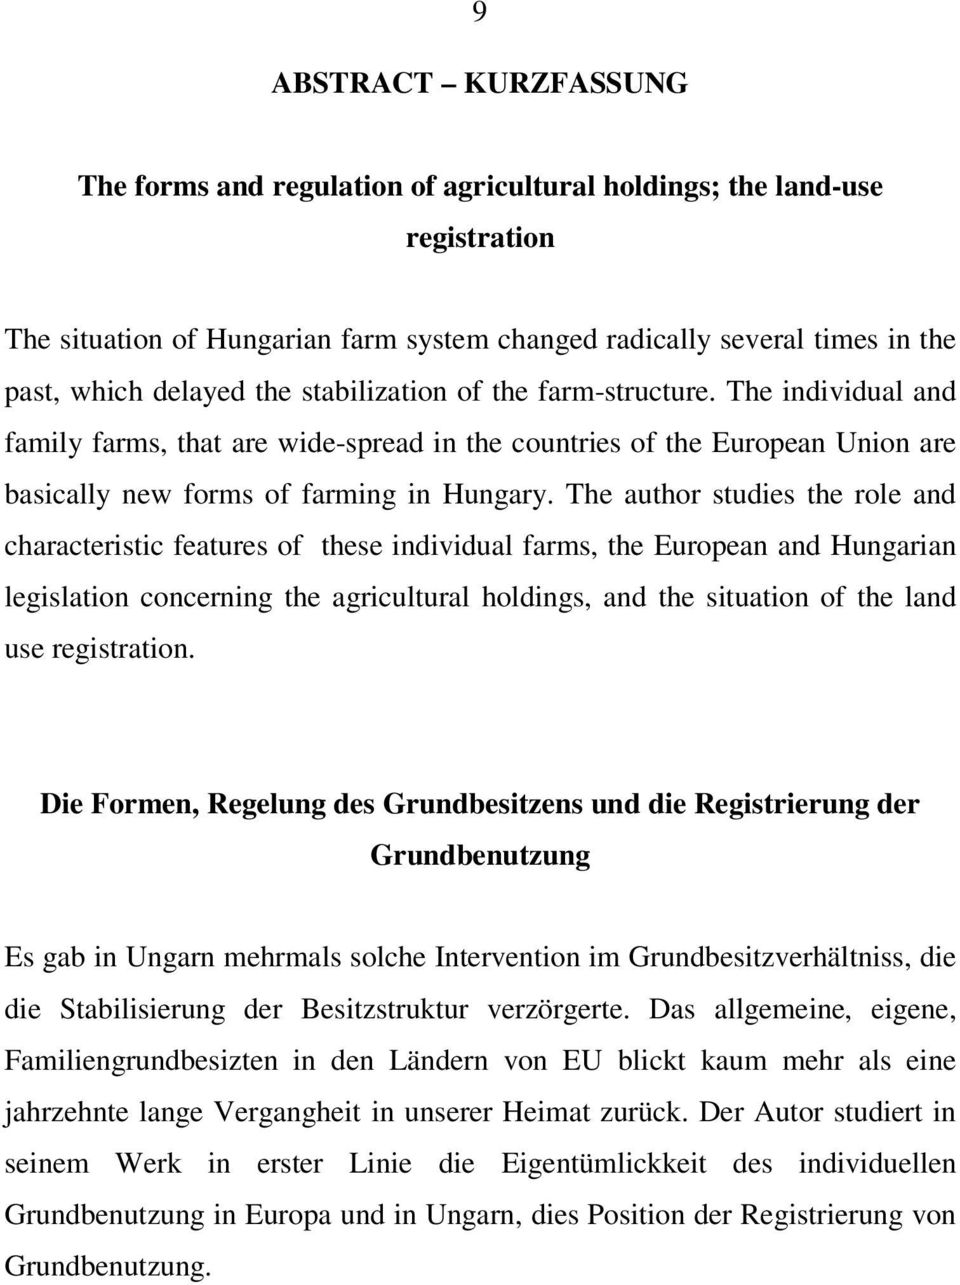 The author studies the role and characteristic features of these individual farms, the European and Hungarian legislation concerning the agricultural holdings, and the situation of the land use